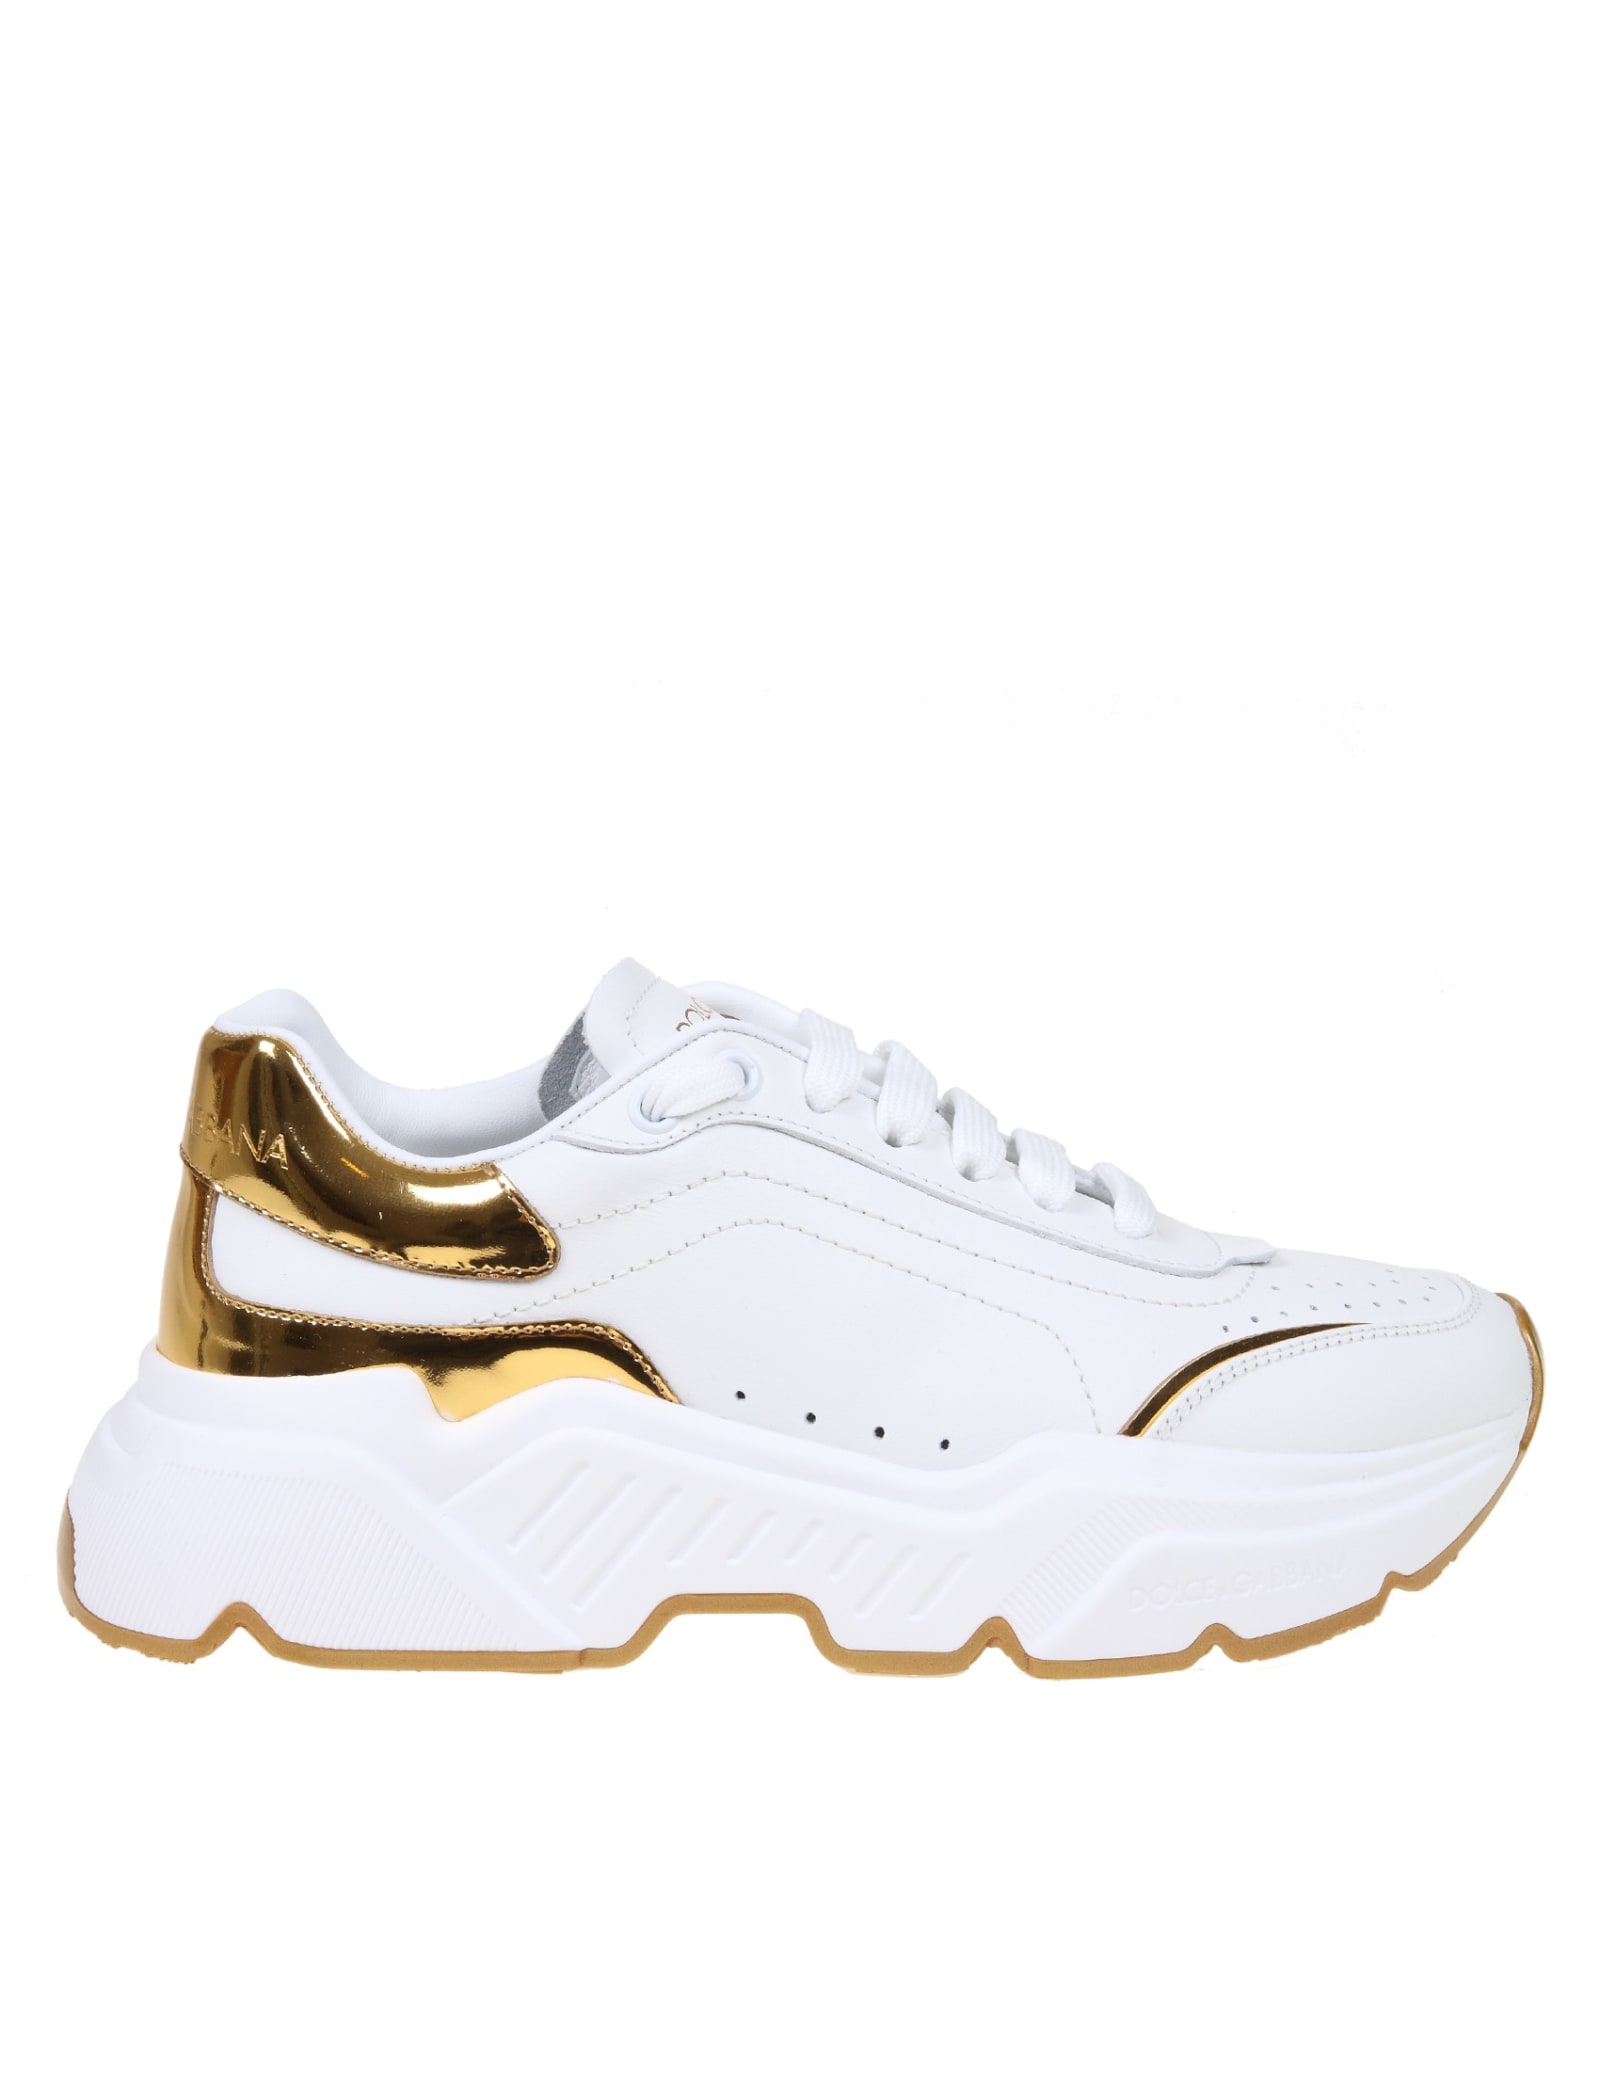 Dolce & Gabbana Daymaster Sneakers Color White And Gold